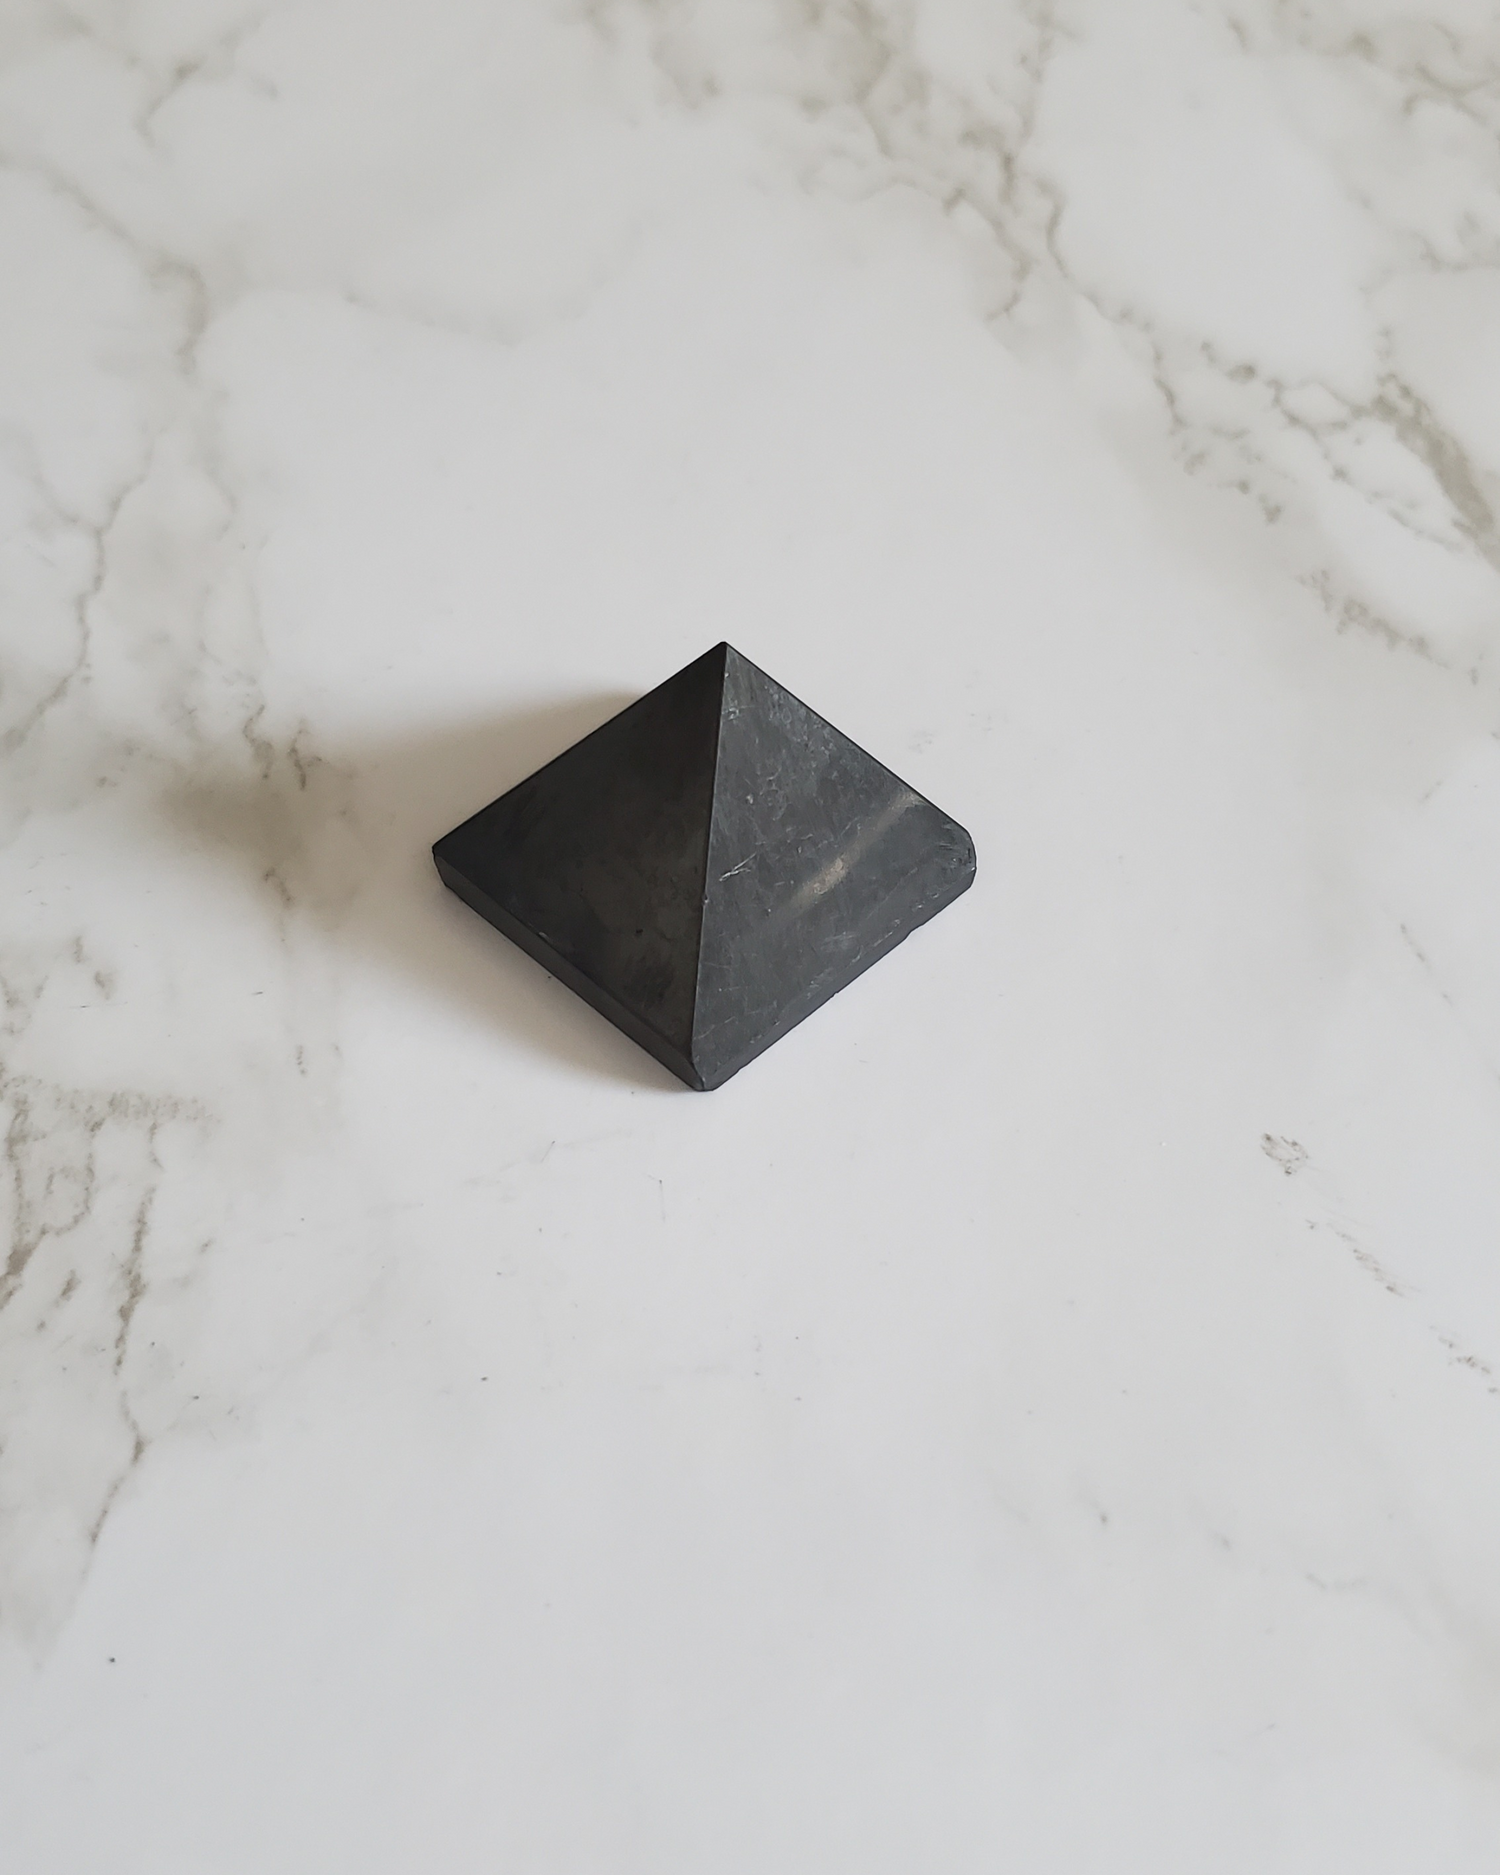 Natural Pain Relief and Protection from 5G and EMFs Shungite Pyramid 25mm